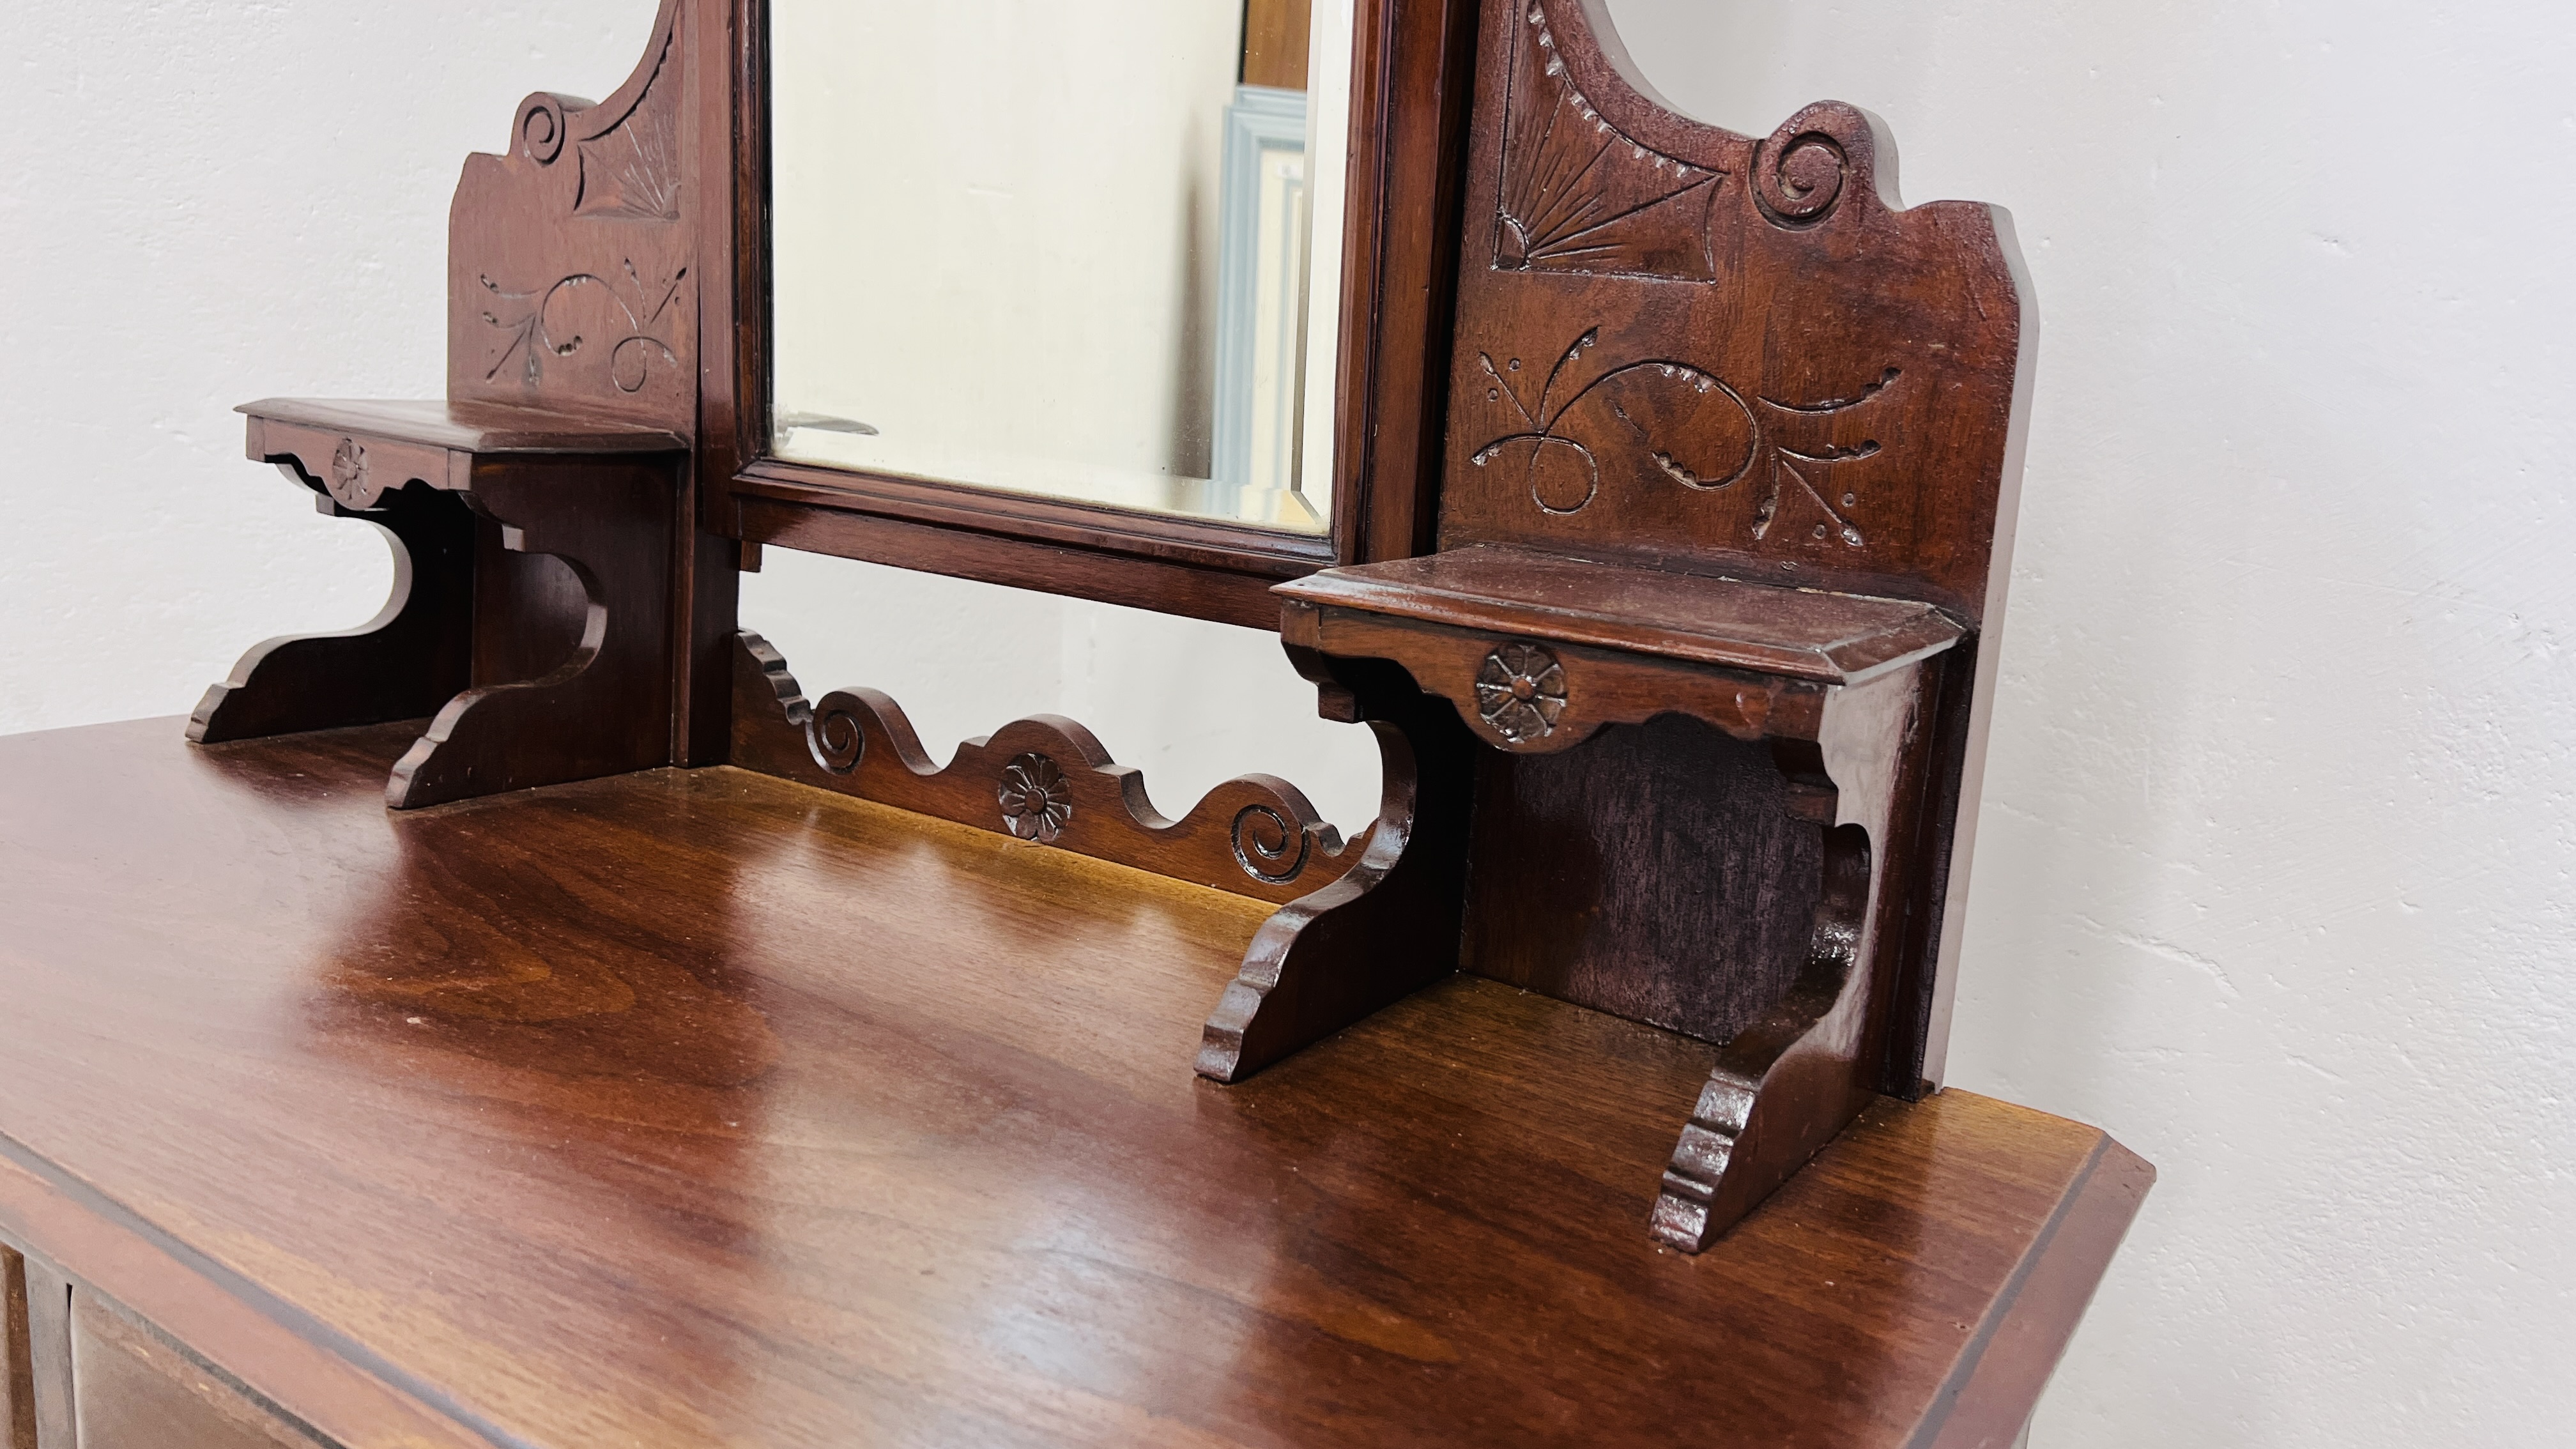 EDWARDIAN MAHOGANY TWO DRAWER DRESSING TABLE, CENTRAL MIRROR ON TURNED LEGS WIDTH 91CM. DEPTH 43CM. - Image 4 of 7